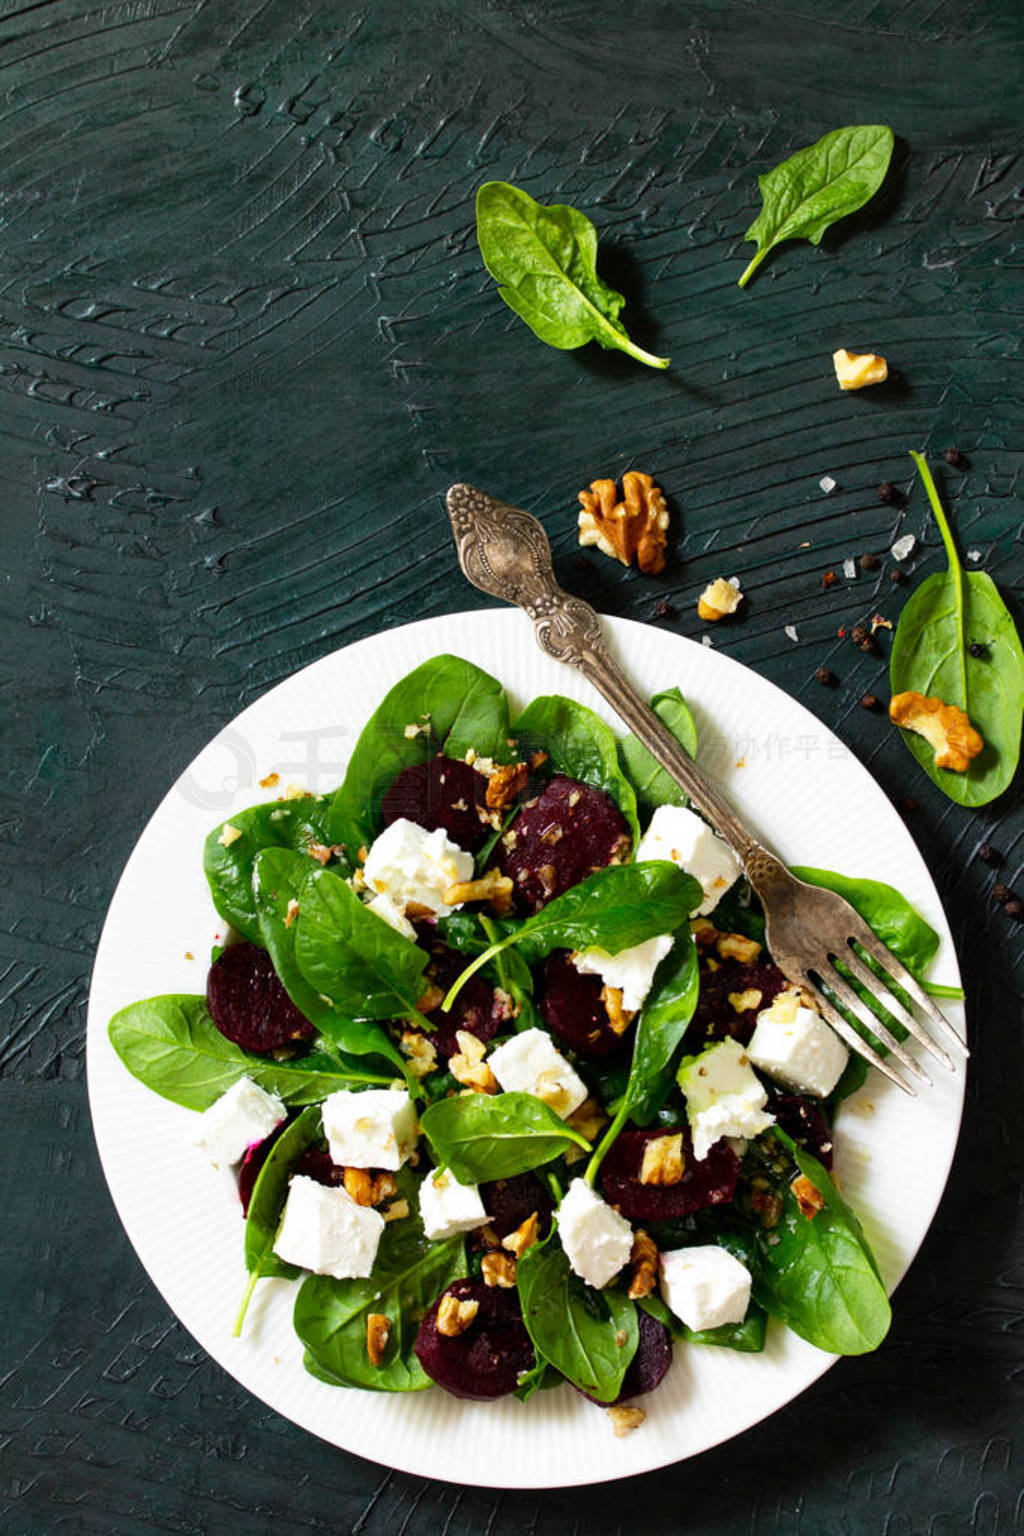 Salad with spinach, feta cheese, beetroot and walnut, vegetable